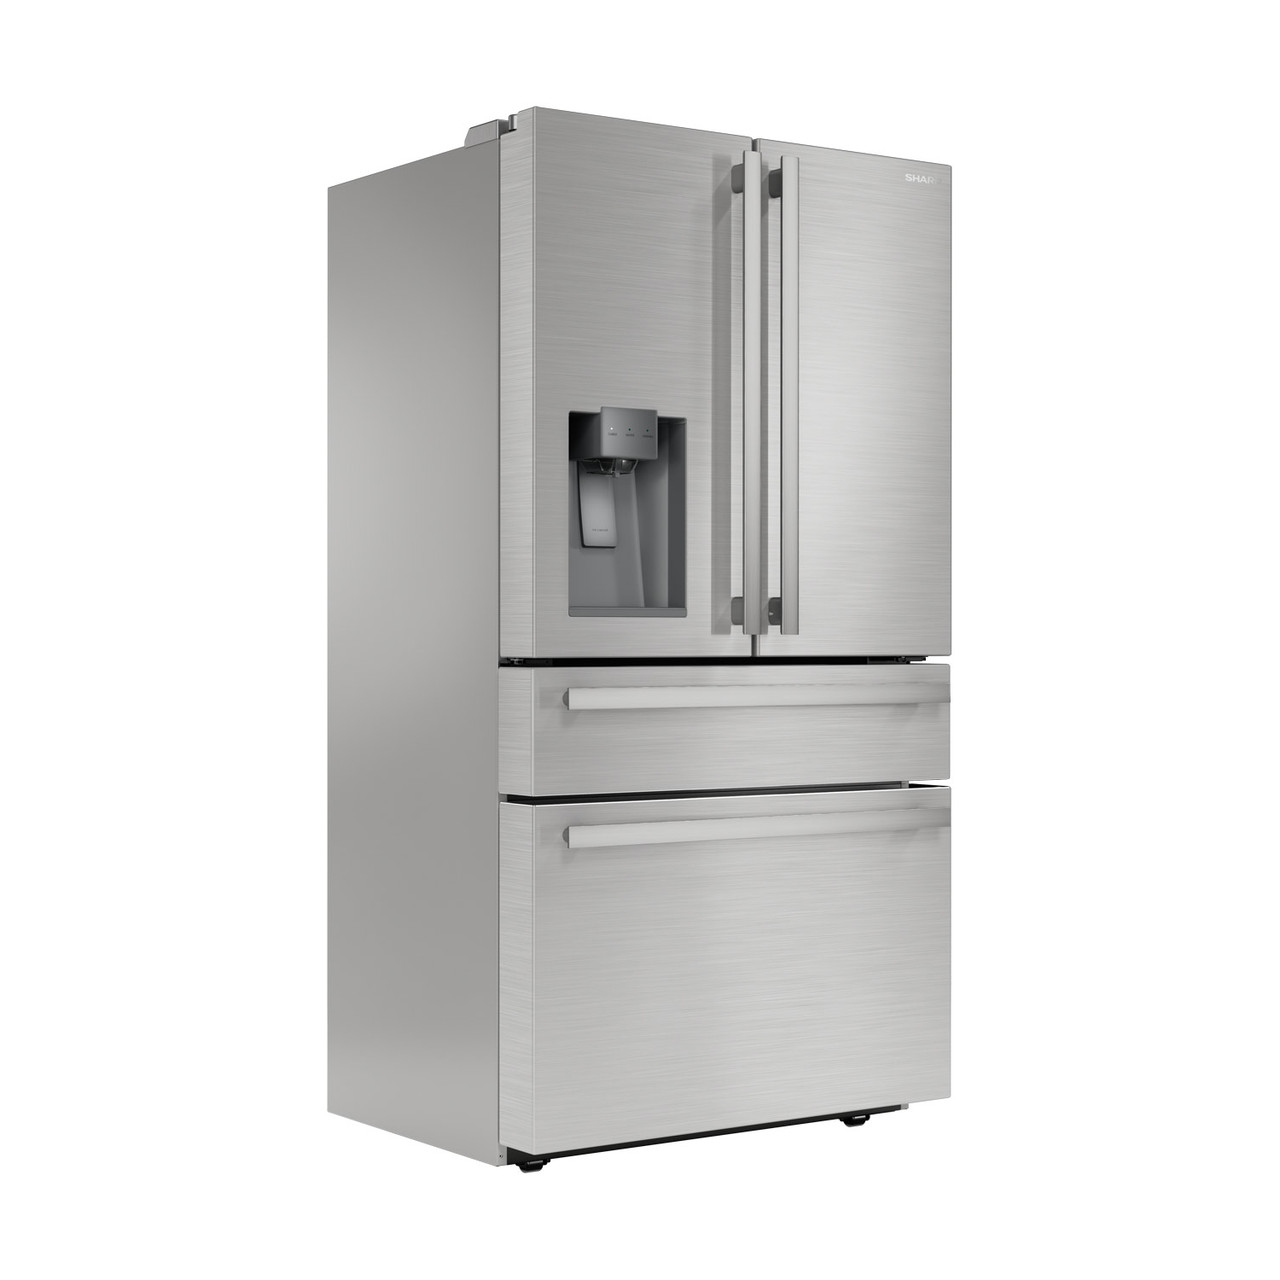 Sharp French 4-Door Counter-Depth Refrigerator with Water Dispenser (SJG2254FS) - right angle view